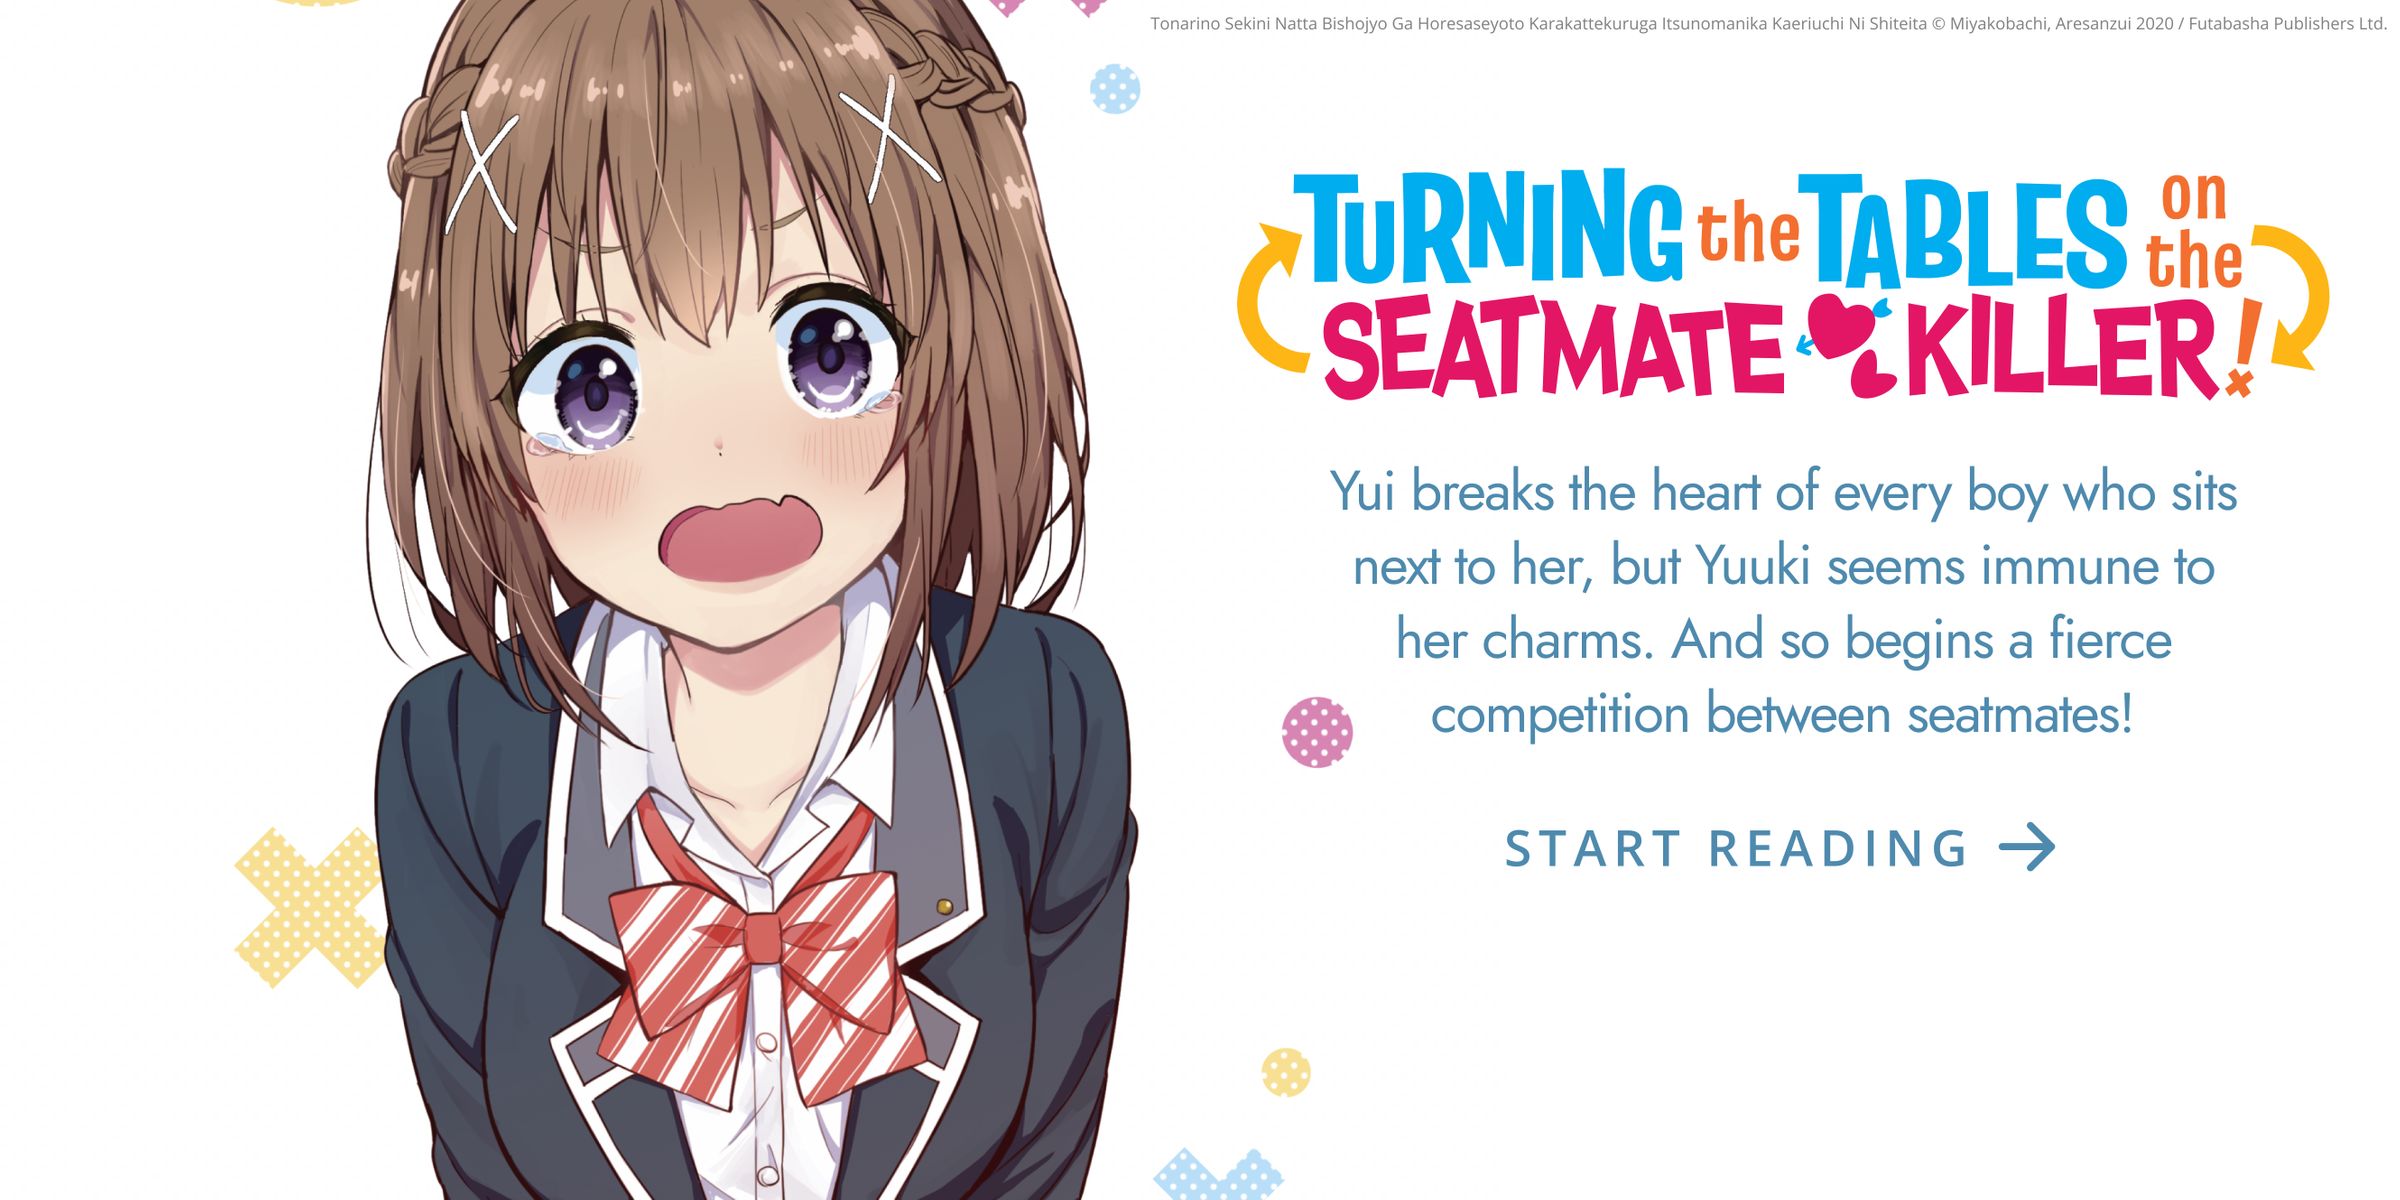 A high school girl looking flustered. Turning the Tables on the Seatmate Killer! Yui breaks the heart of every boy who sits next to her, but Yuuki seems immune to her charms. Start Reading.